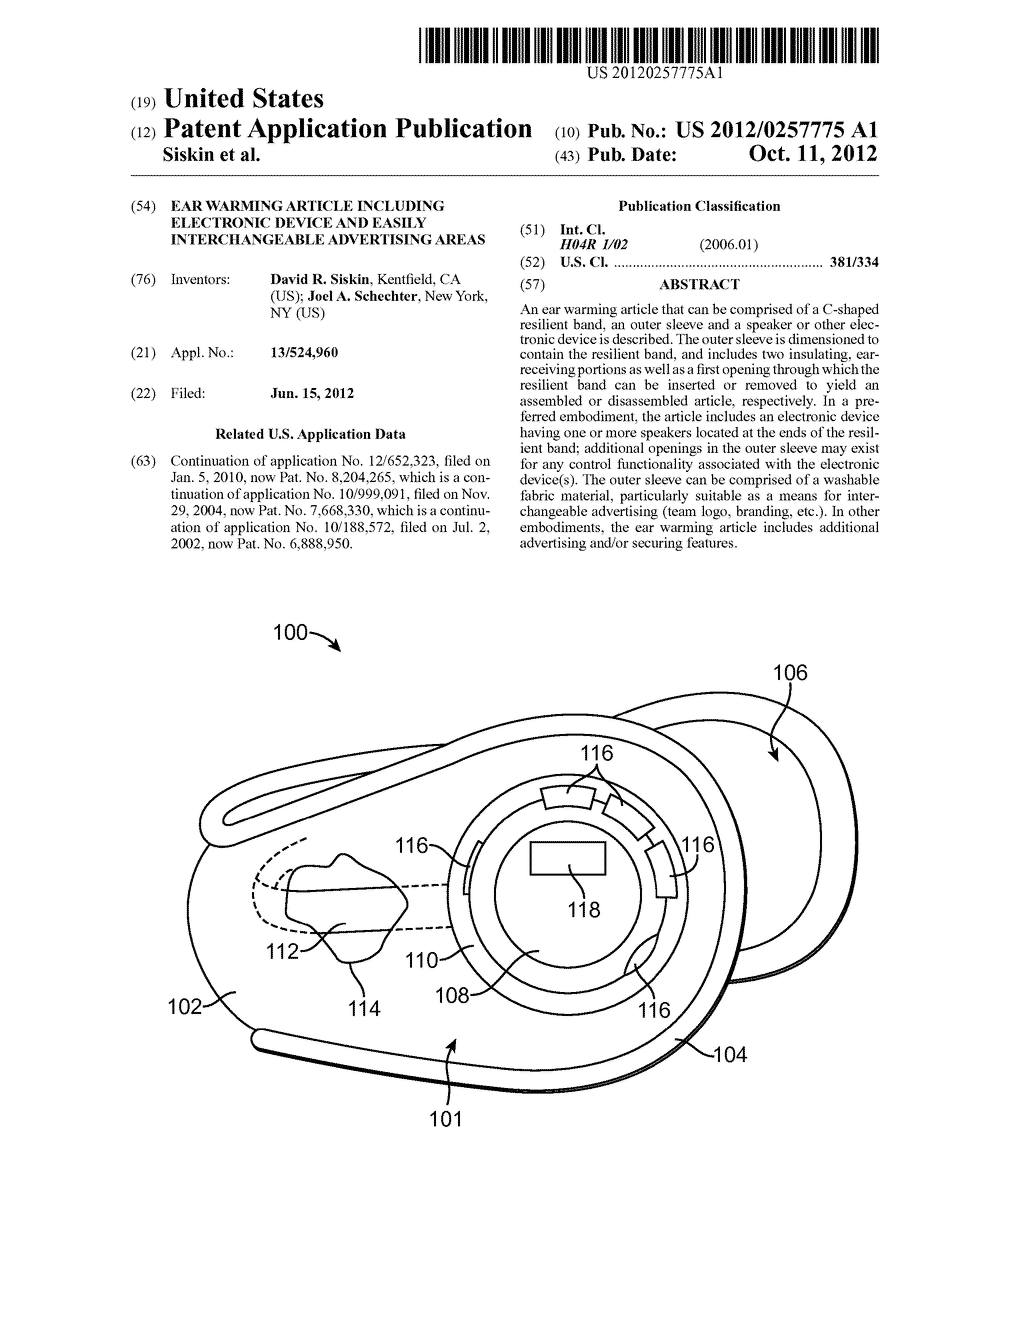 Ear warming article including electronic device and easily interchangeable     advertising areas - diagram, schematic, and image 01